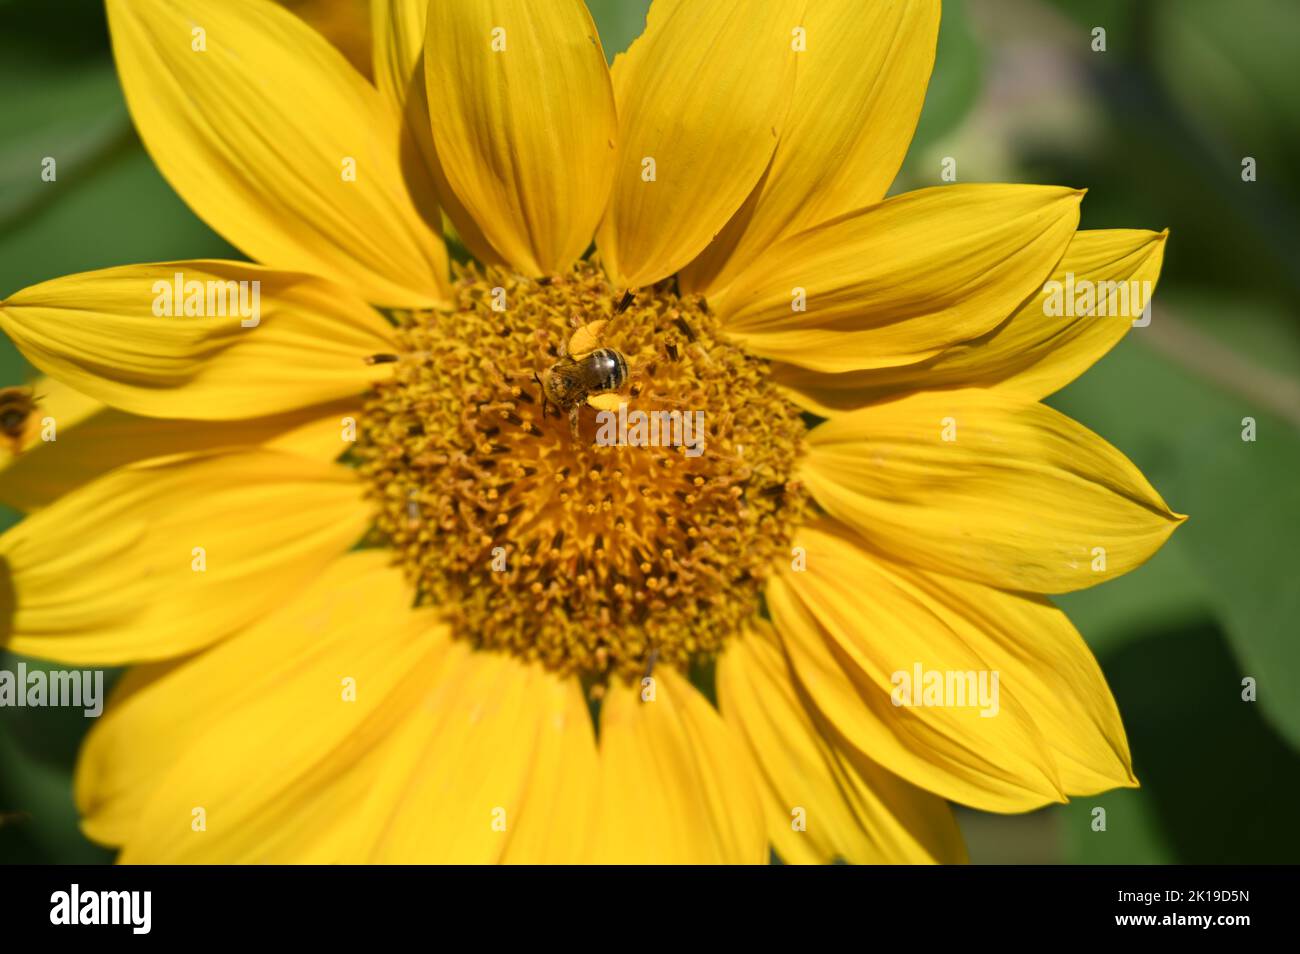 Sunflower in Full Bloom with Busy Bee Stock Photo - Alamy